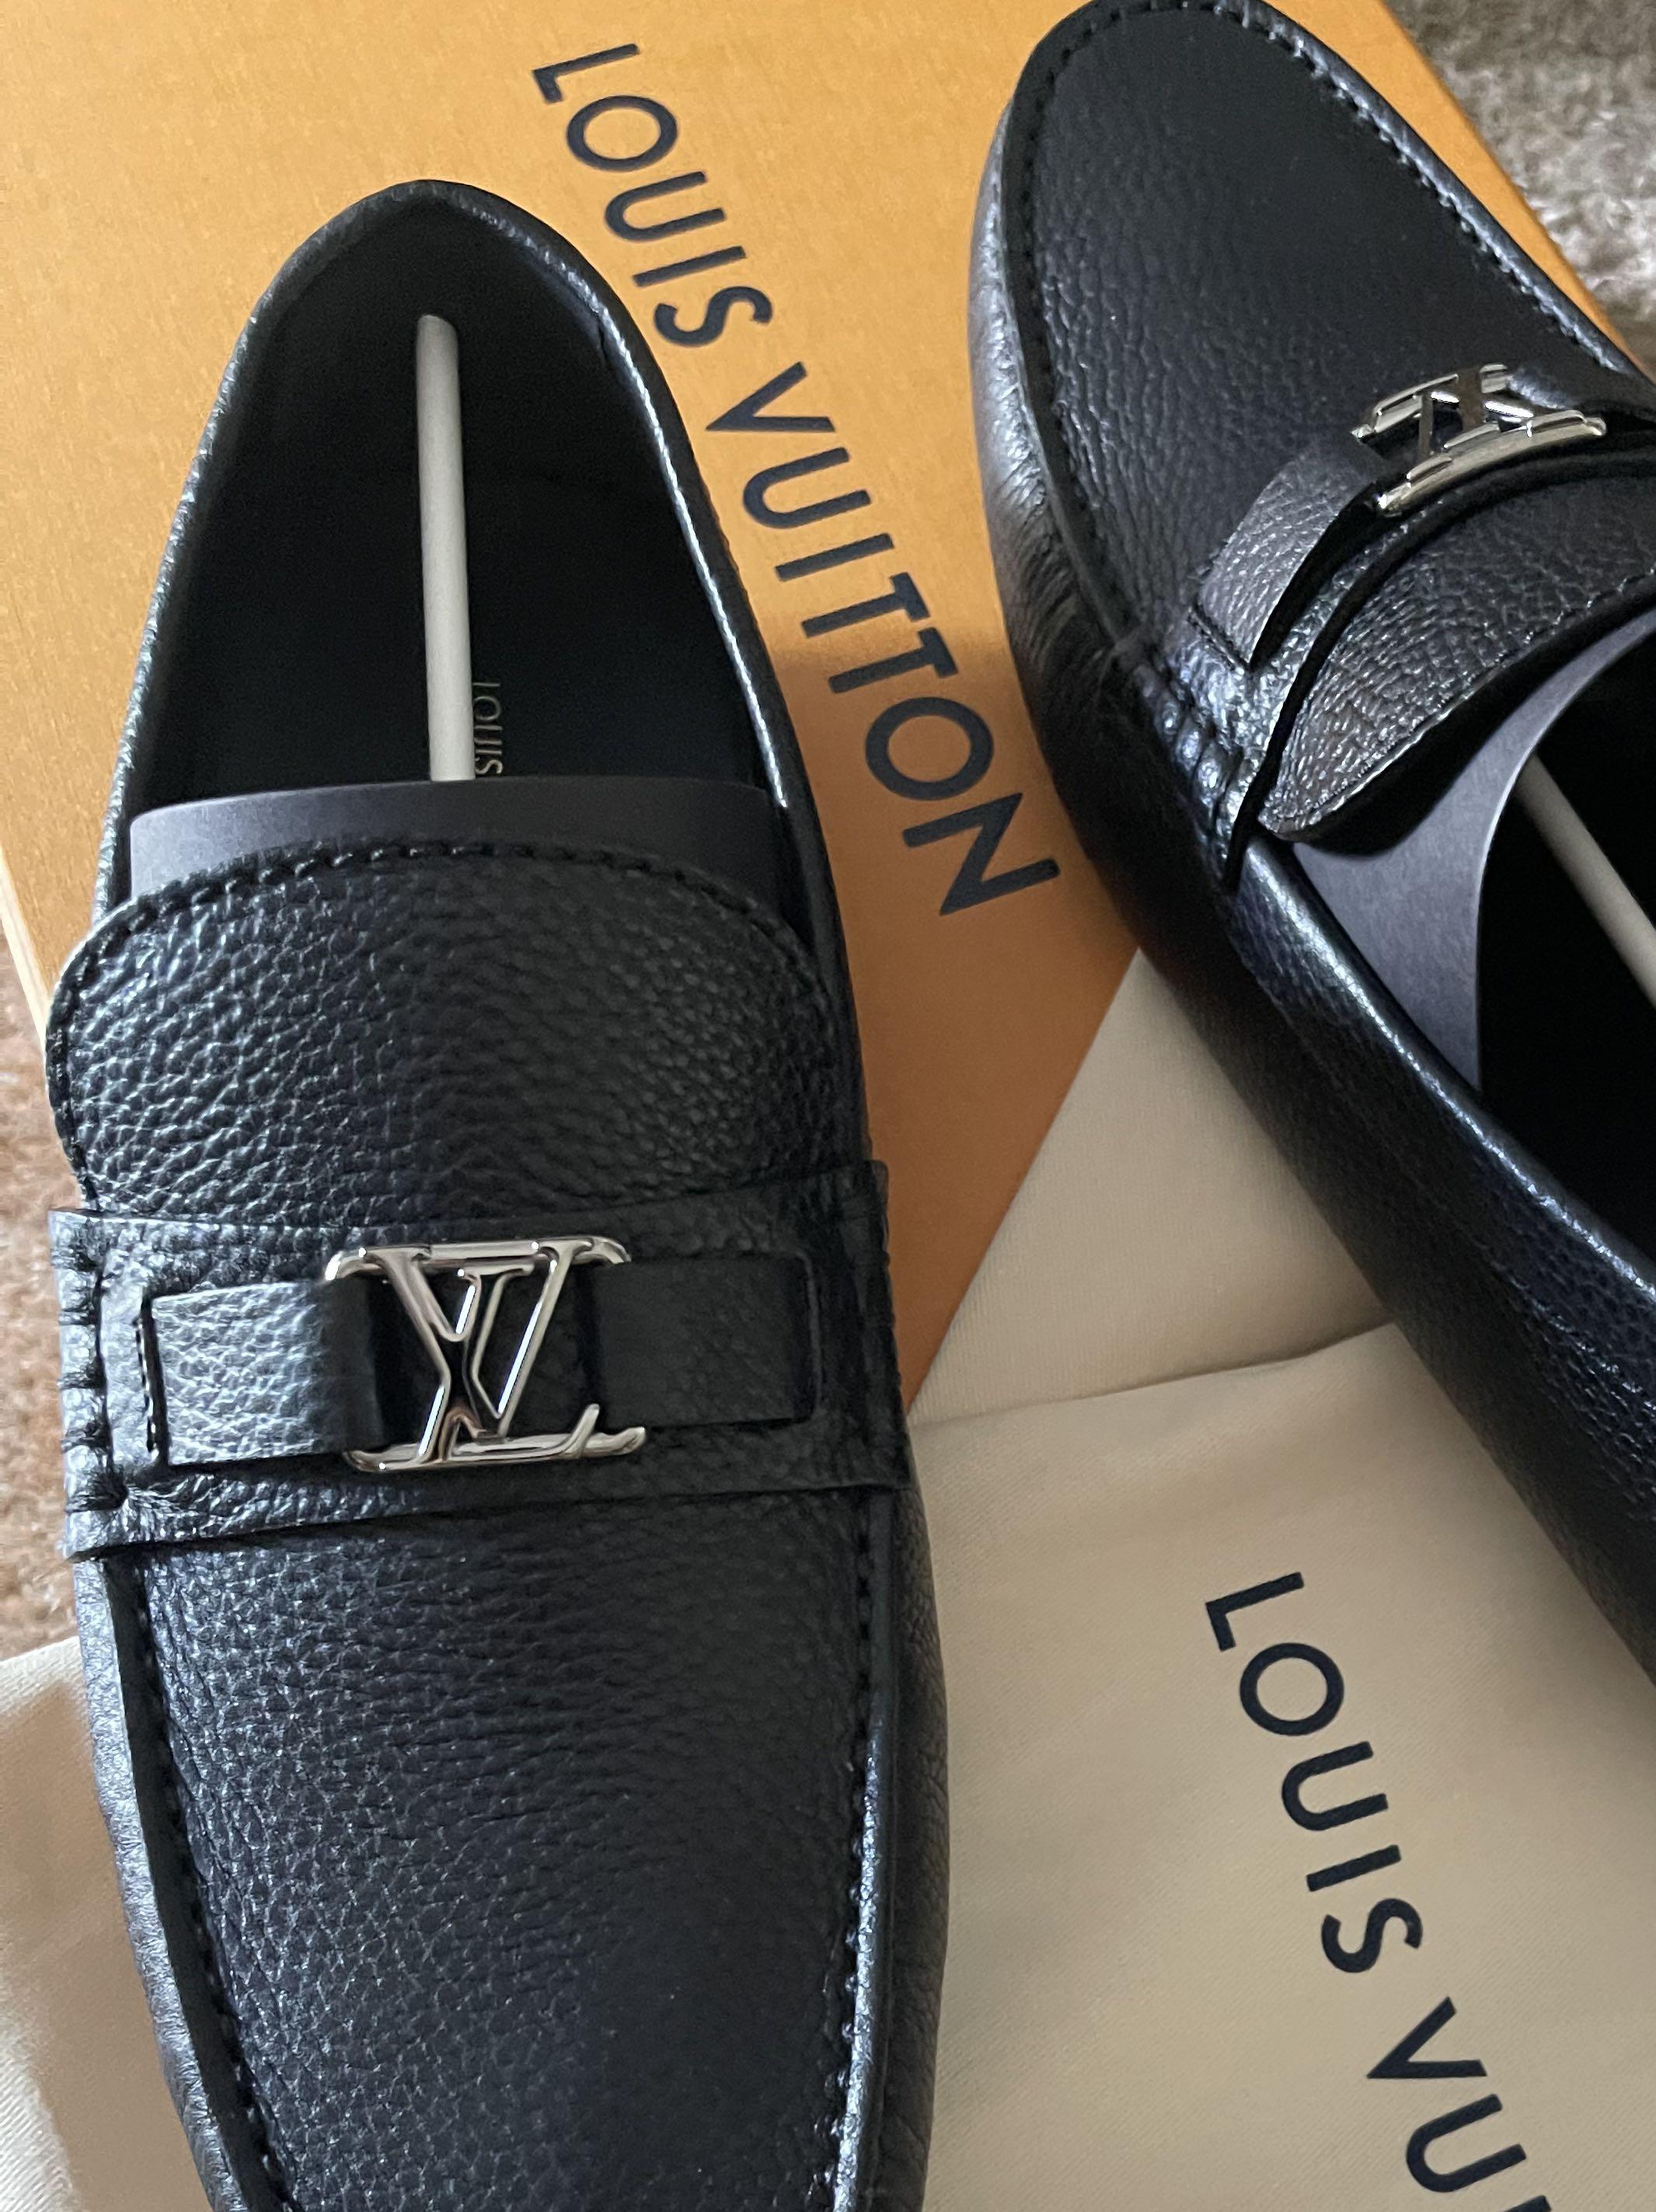 Super handsome lv casual shoes🕶🕶🕶, Gallery posted by Lisa💖